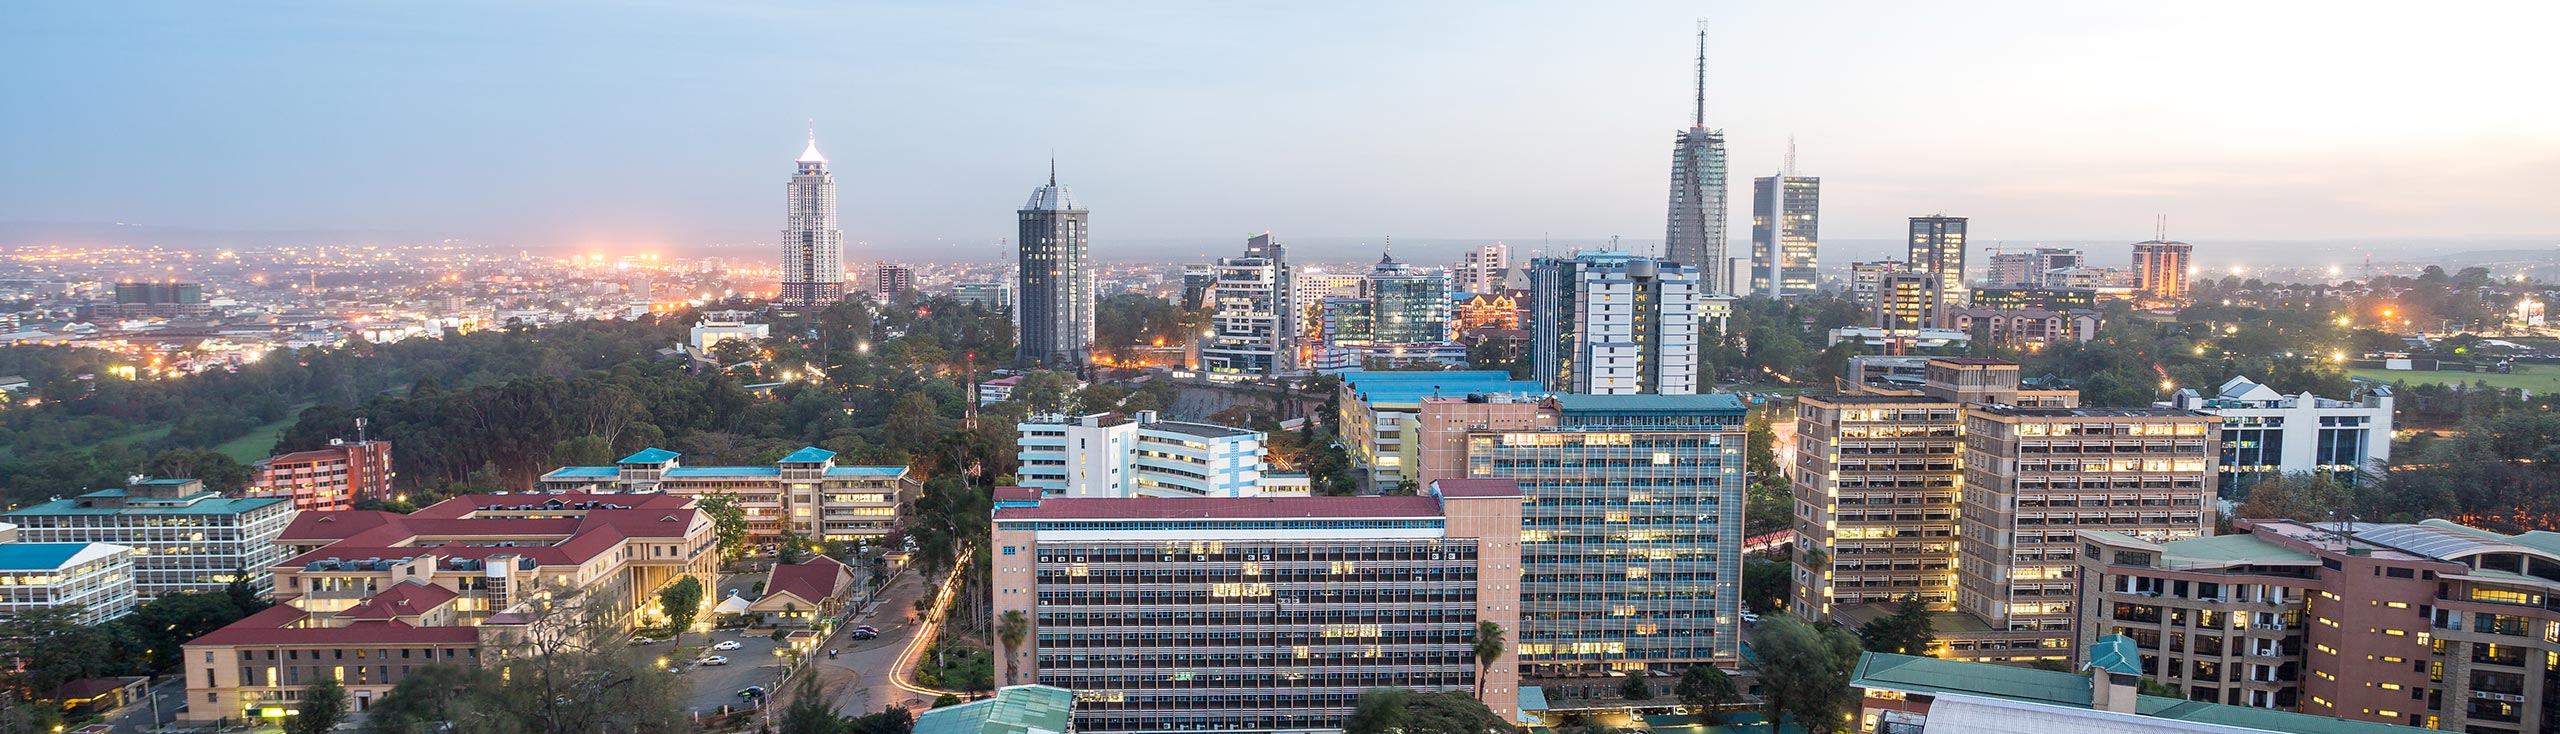 Africa is the next destination for the EDGE standard. Green buildings in Kenya are able to become EDGE-Certified